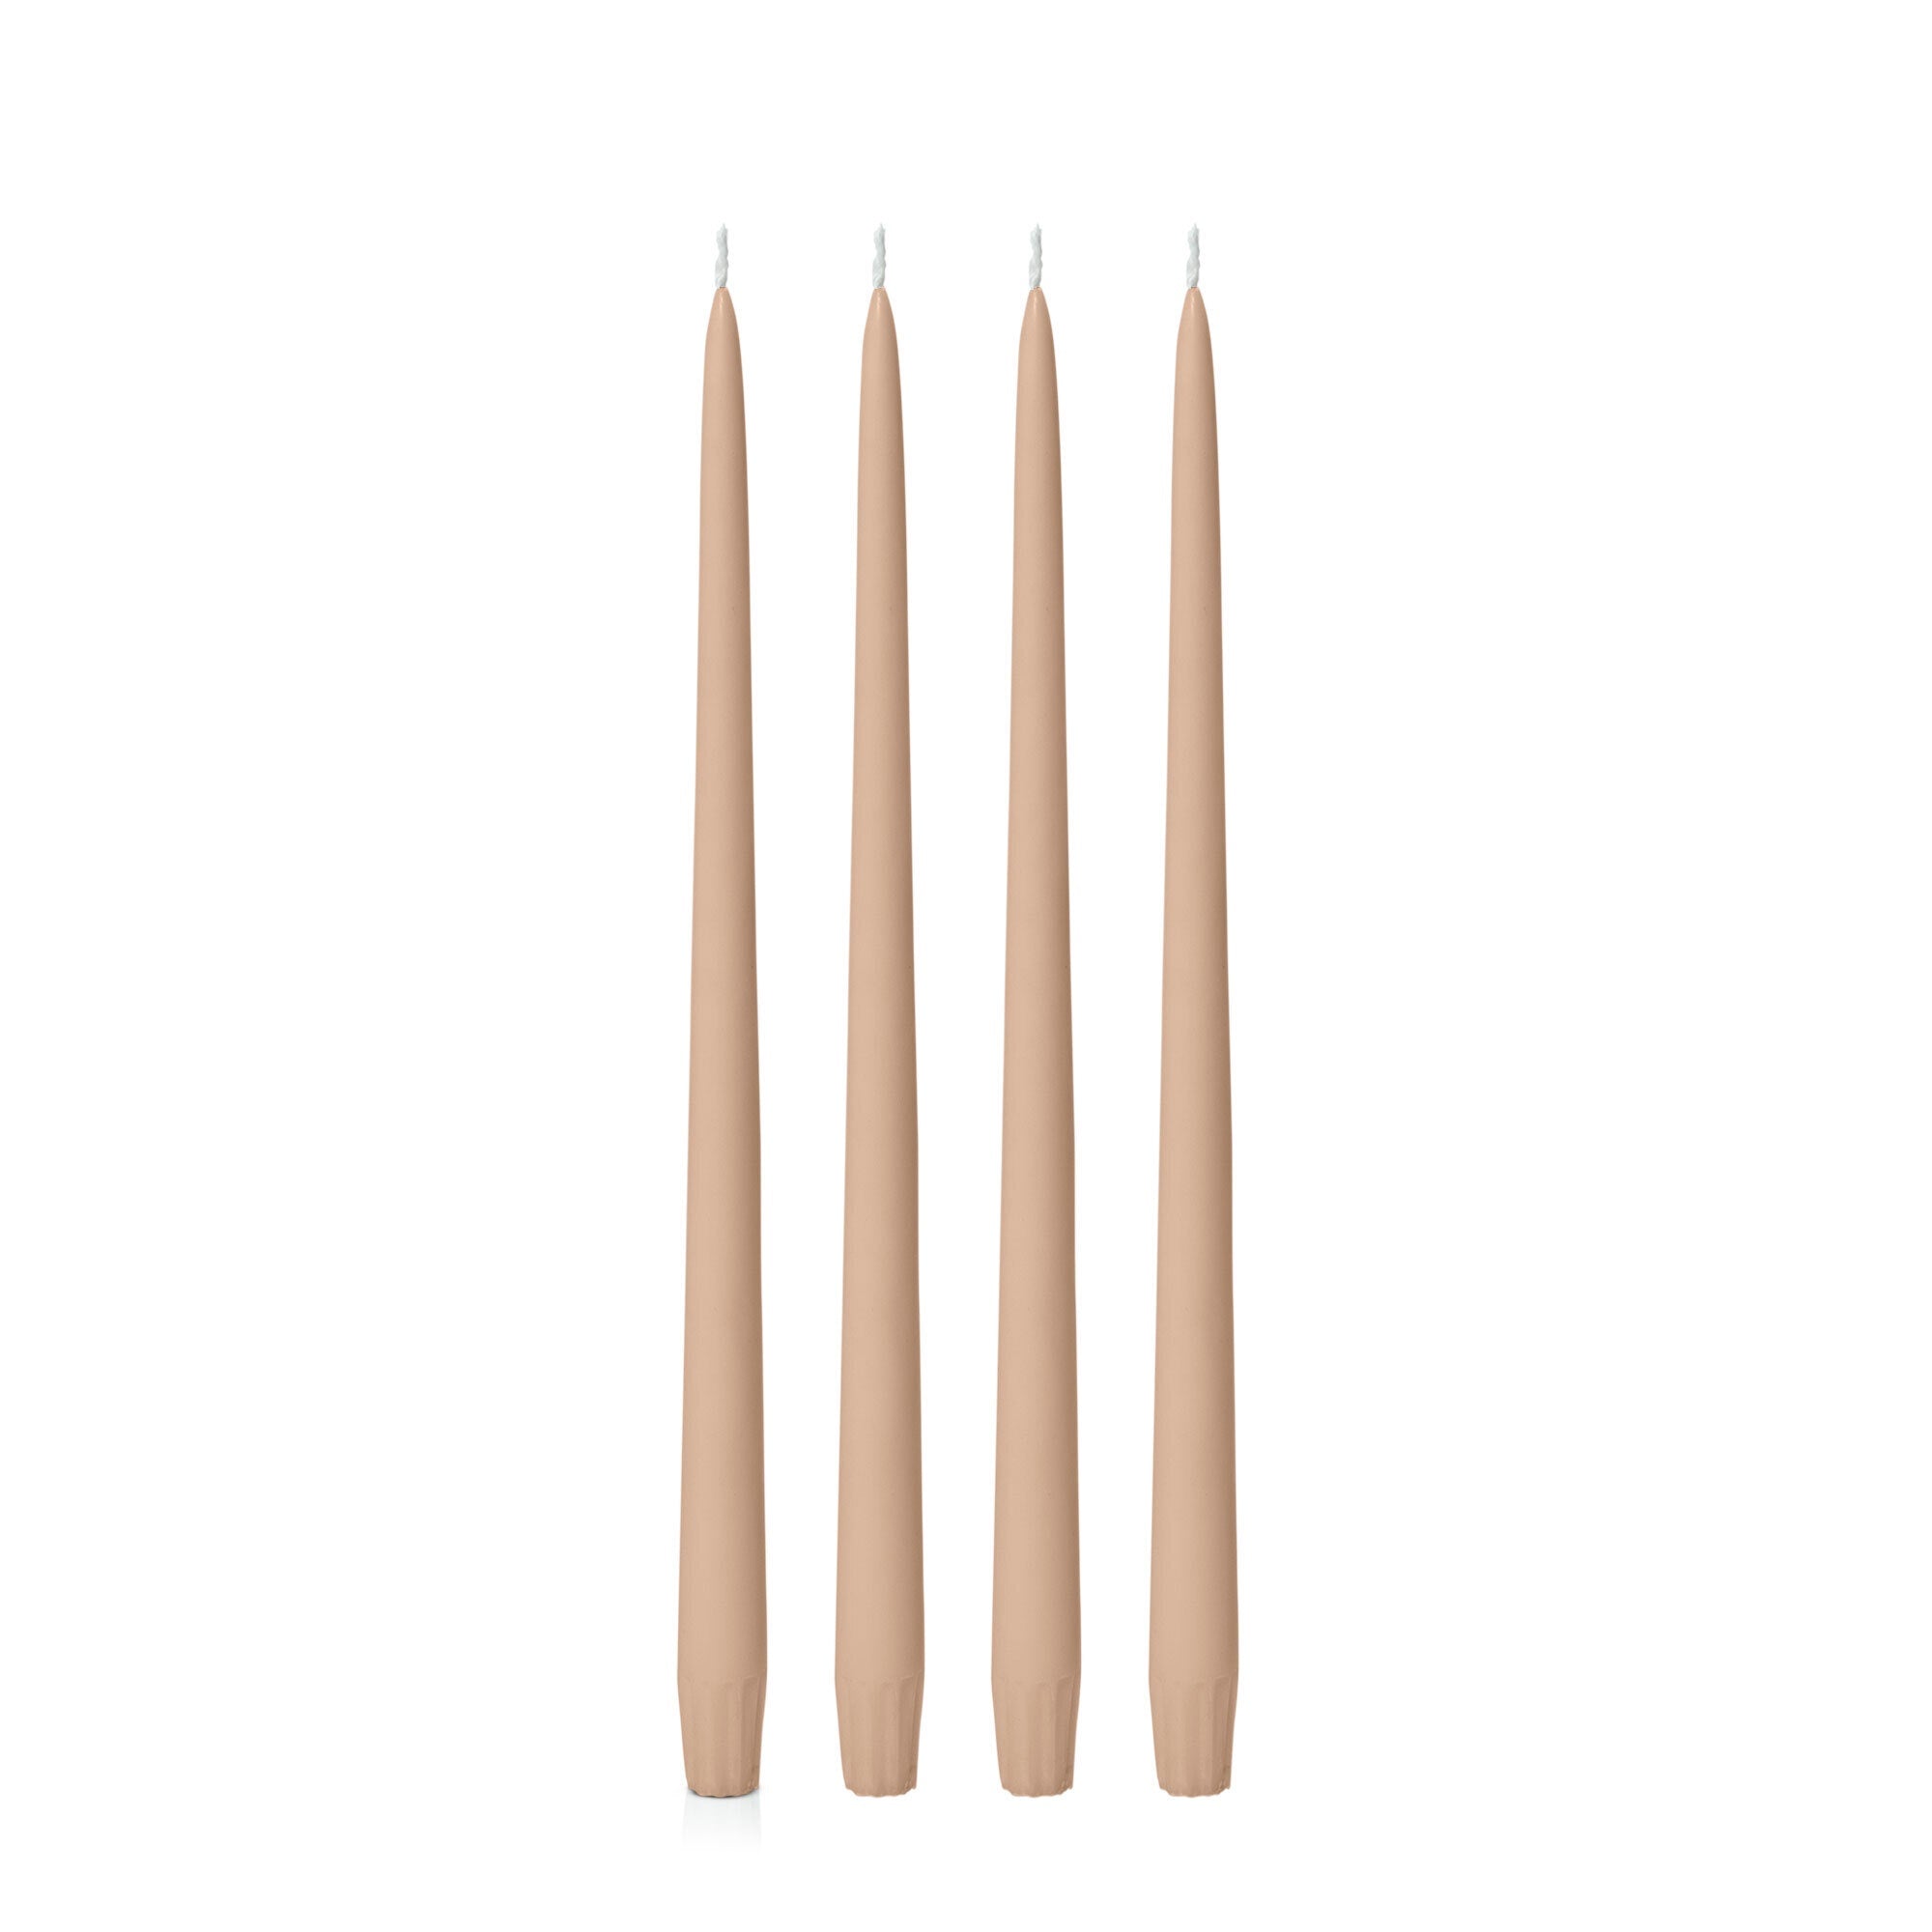 Tapered Candle 35cm, Latte, Pack of 4